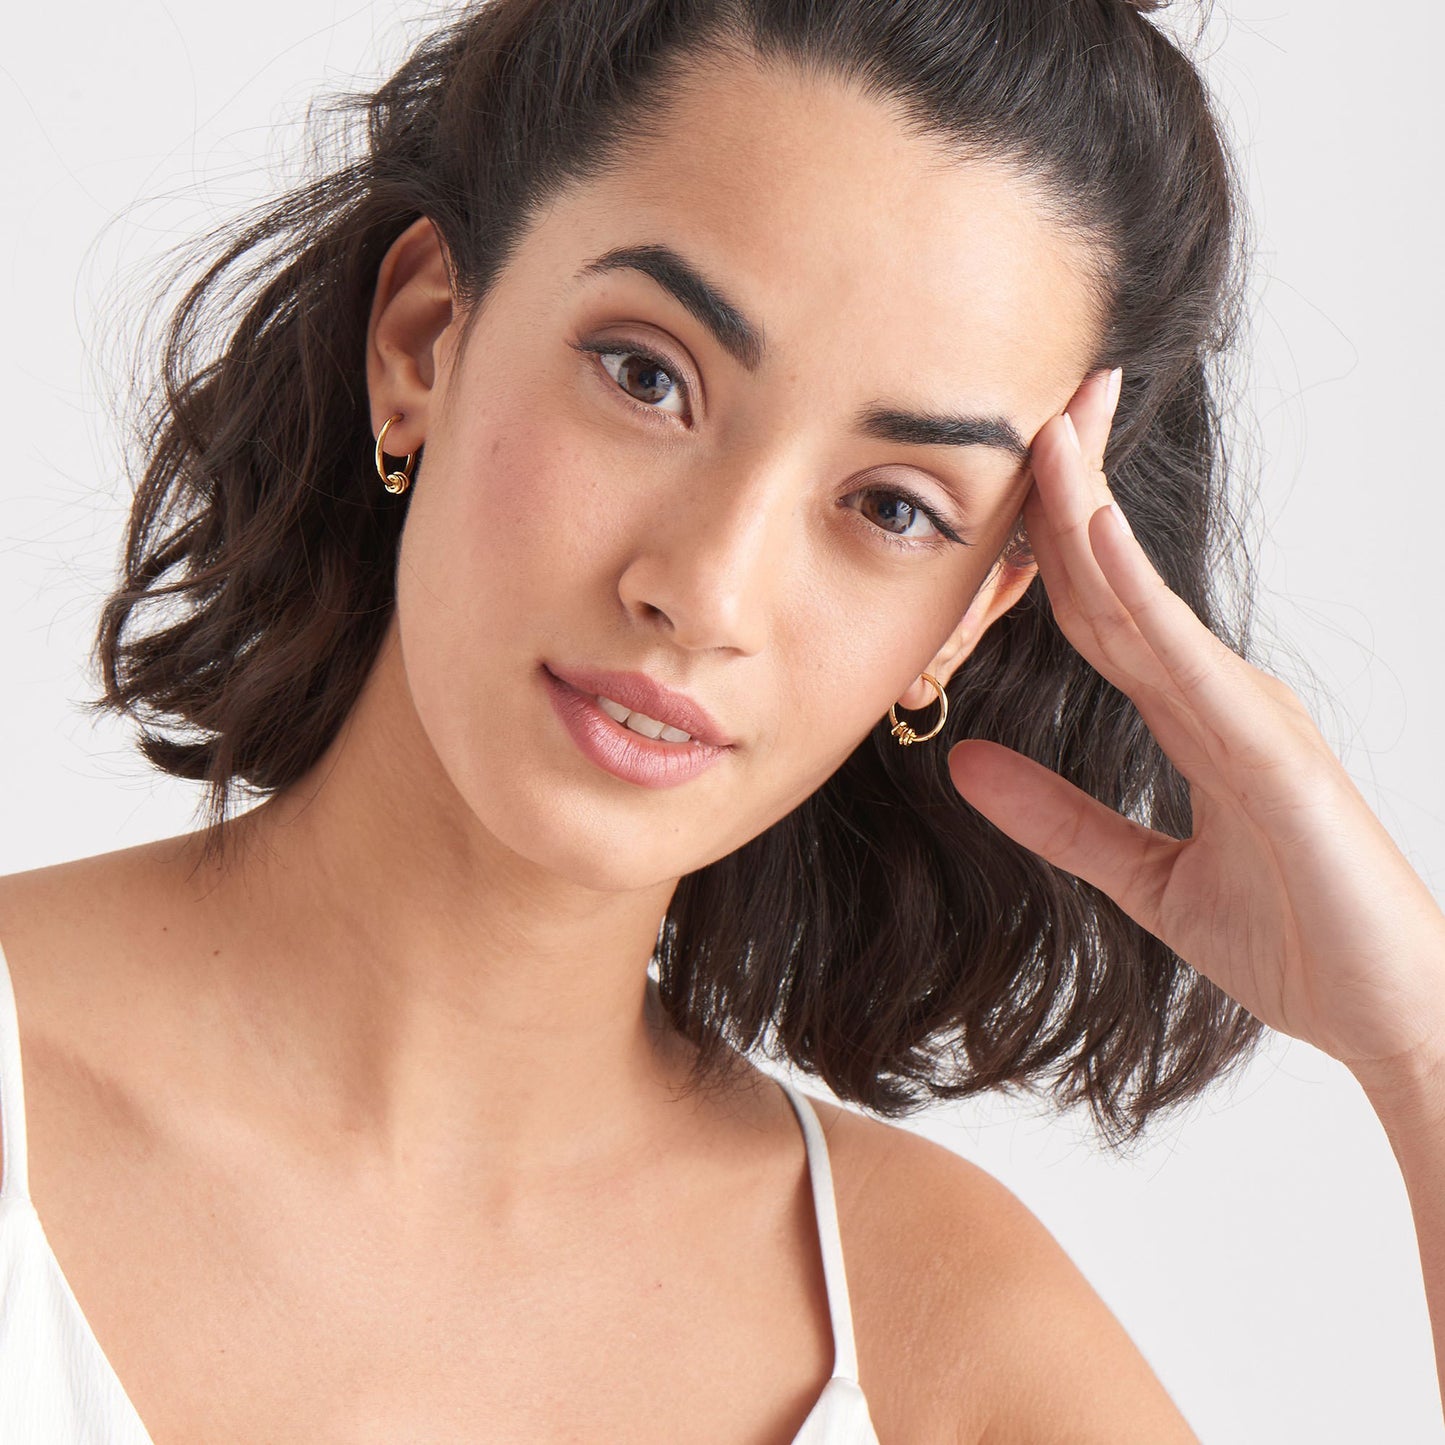 ANIA HAIE ANIA HAIE - Gold Modern Hoop Earrings available at The Good Life Boutique